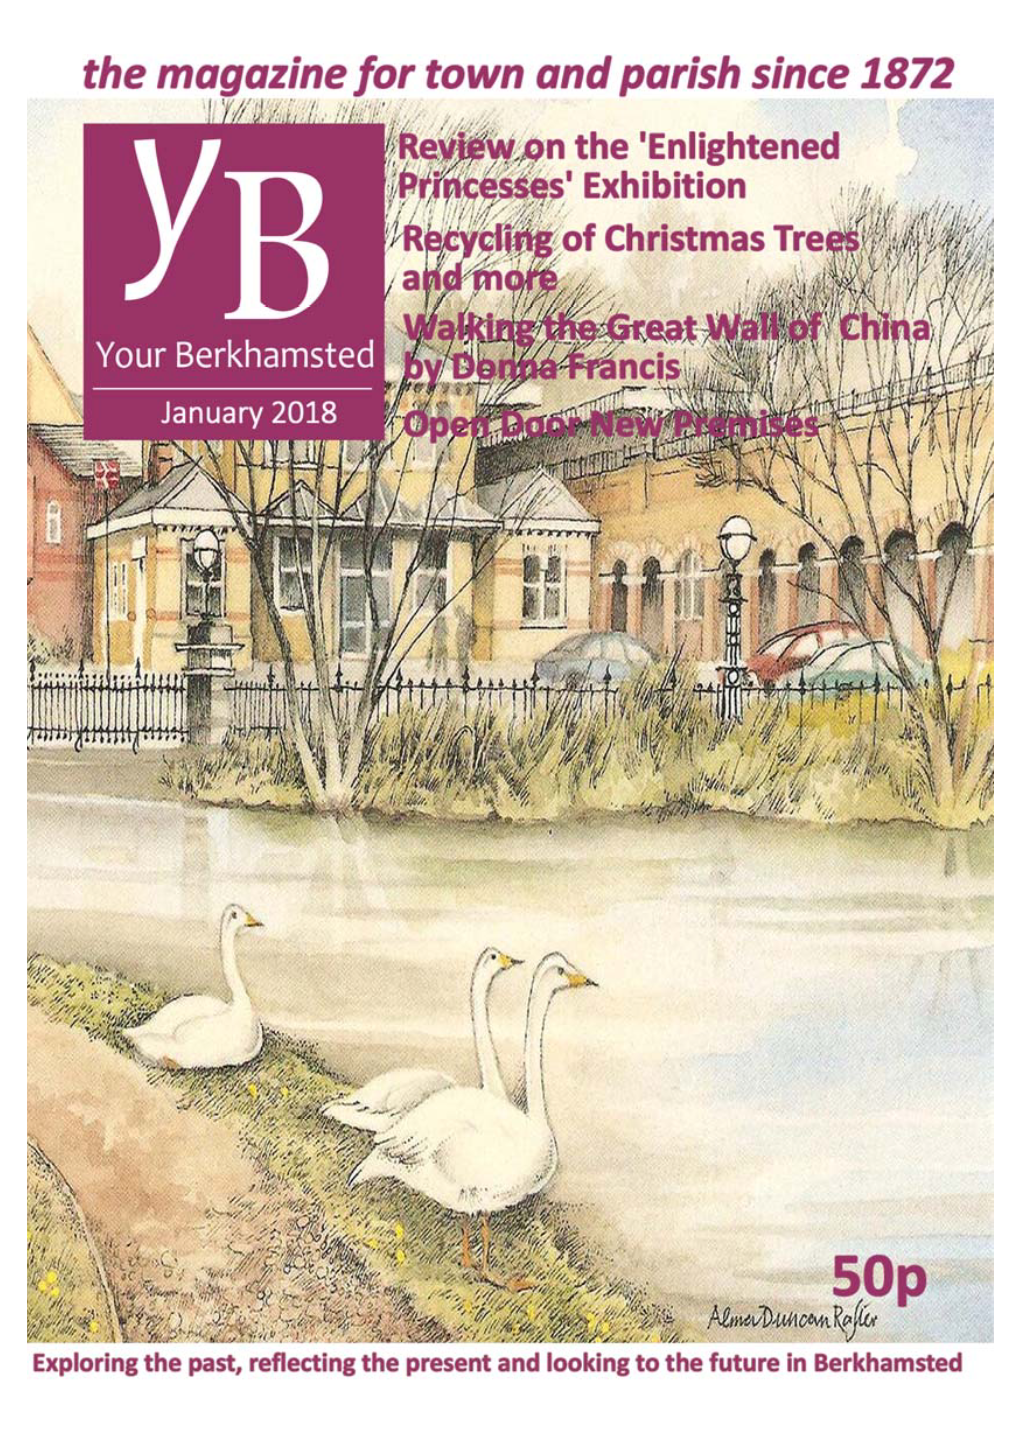 January 2018 Edition of Your Berkhamsted